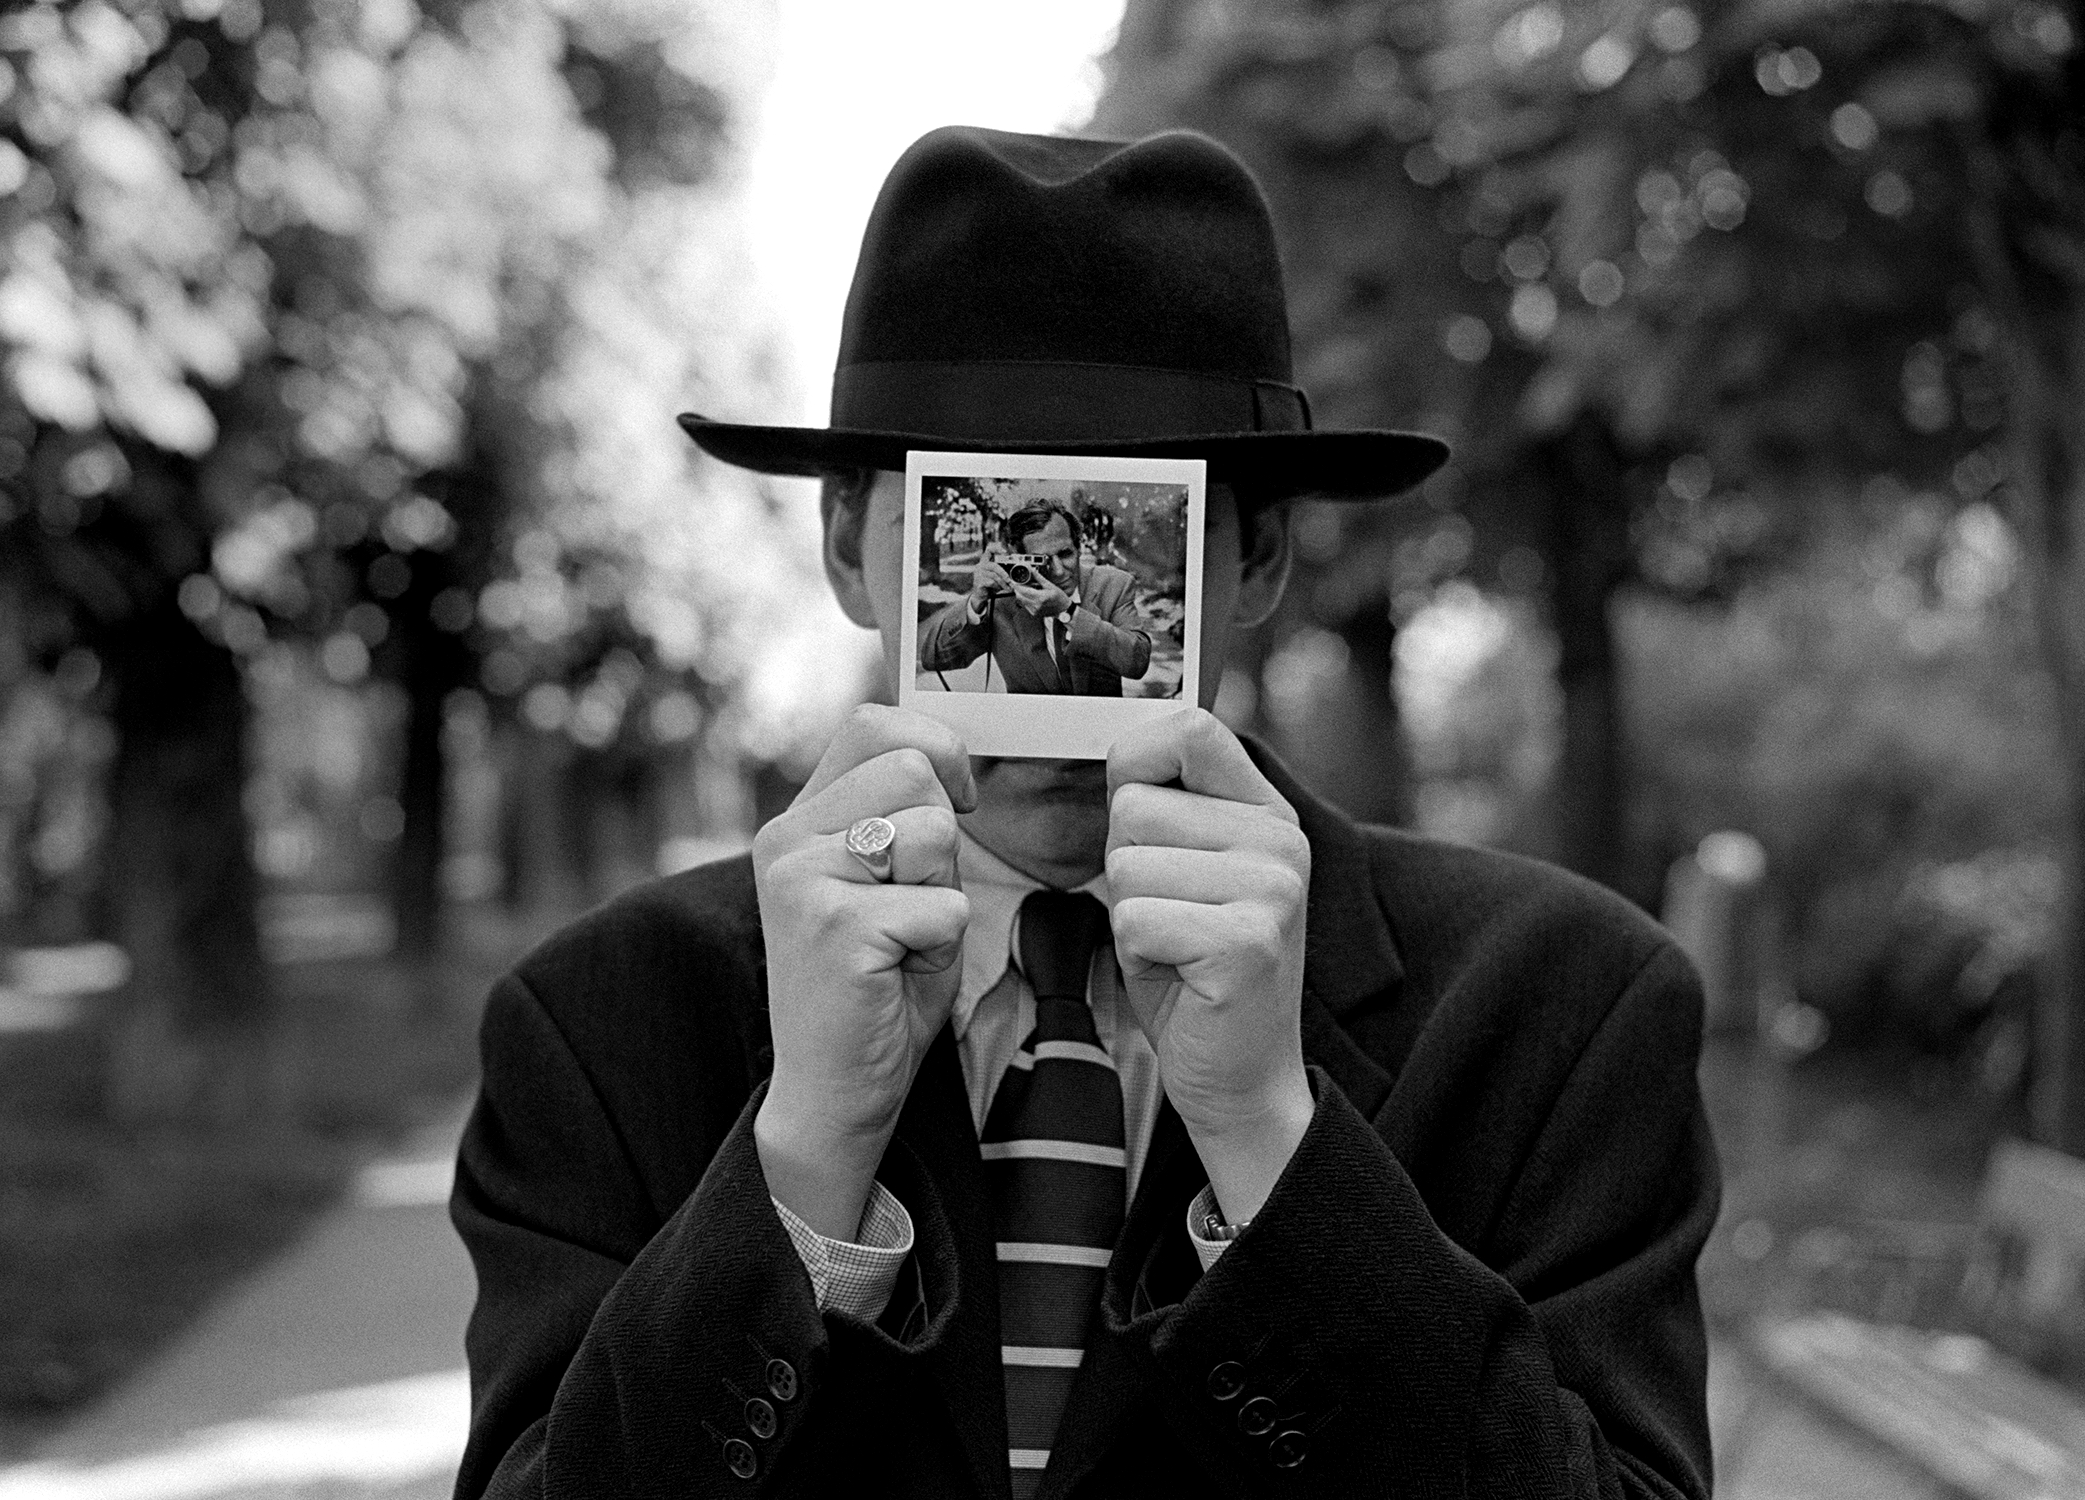 Rodney Smith - Stock Photography Images And Inspiration // Blend Images